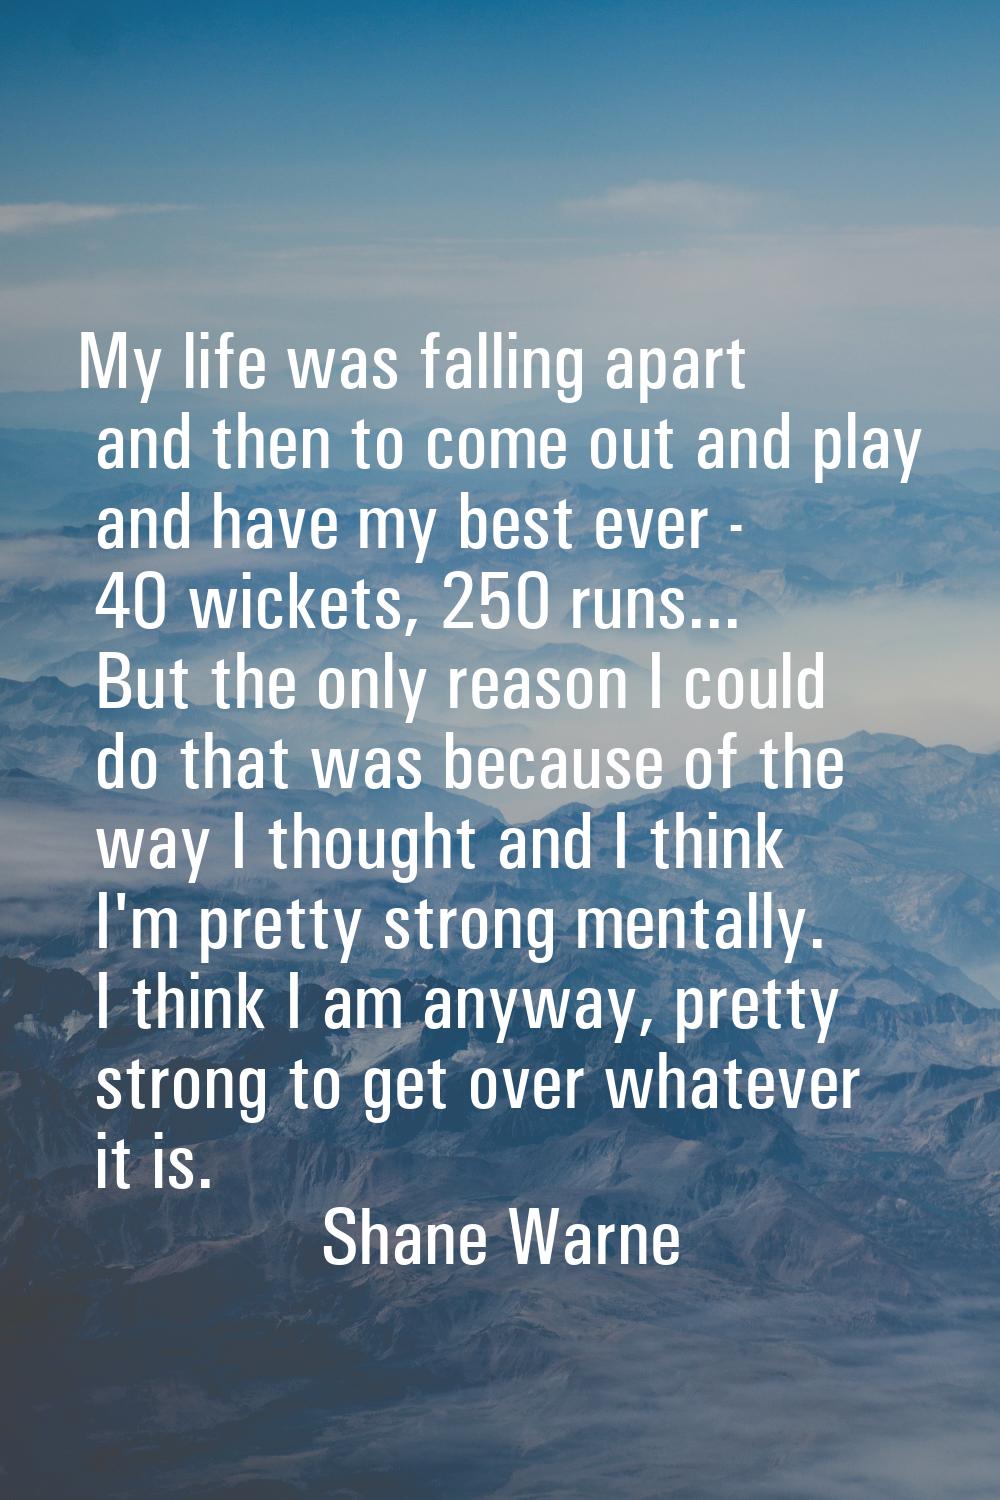 My life was falling apart and then to come out and play and have my best ever - 40 wickets, 250 run